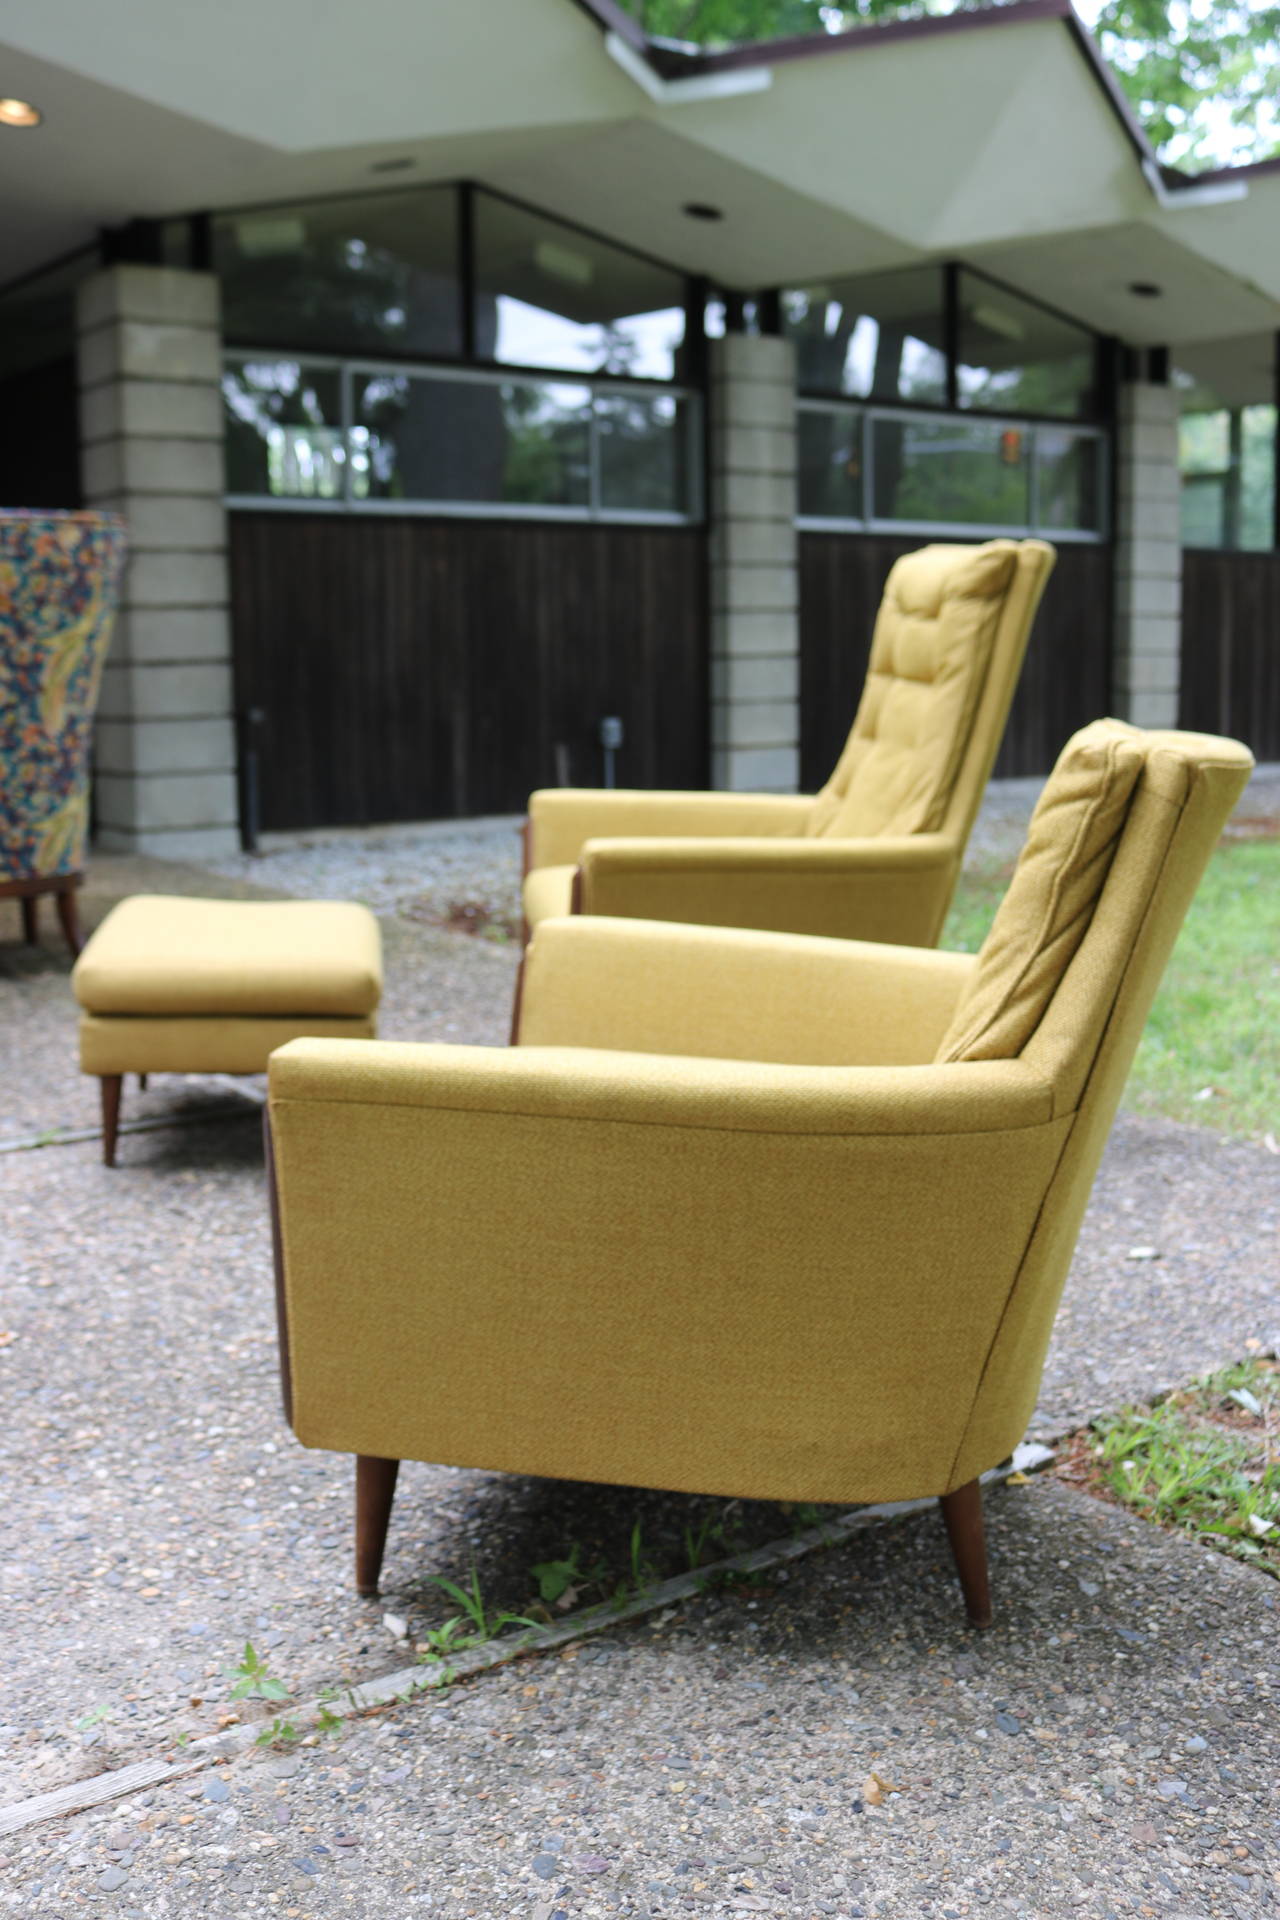 American His and Hers Adrian Pearsall Armchairs with Ottoman